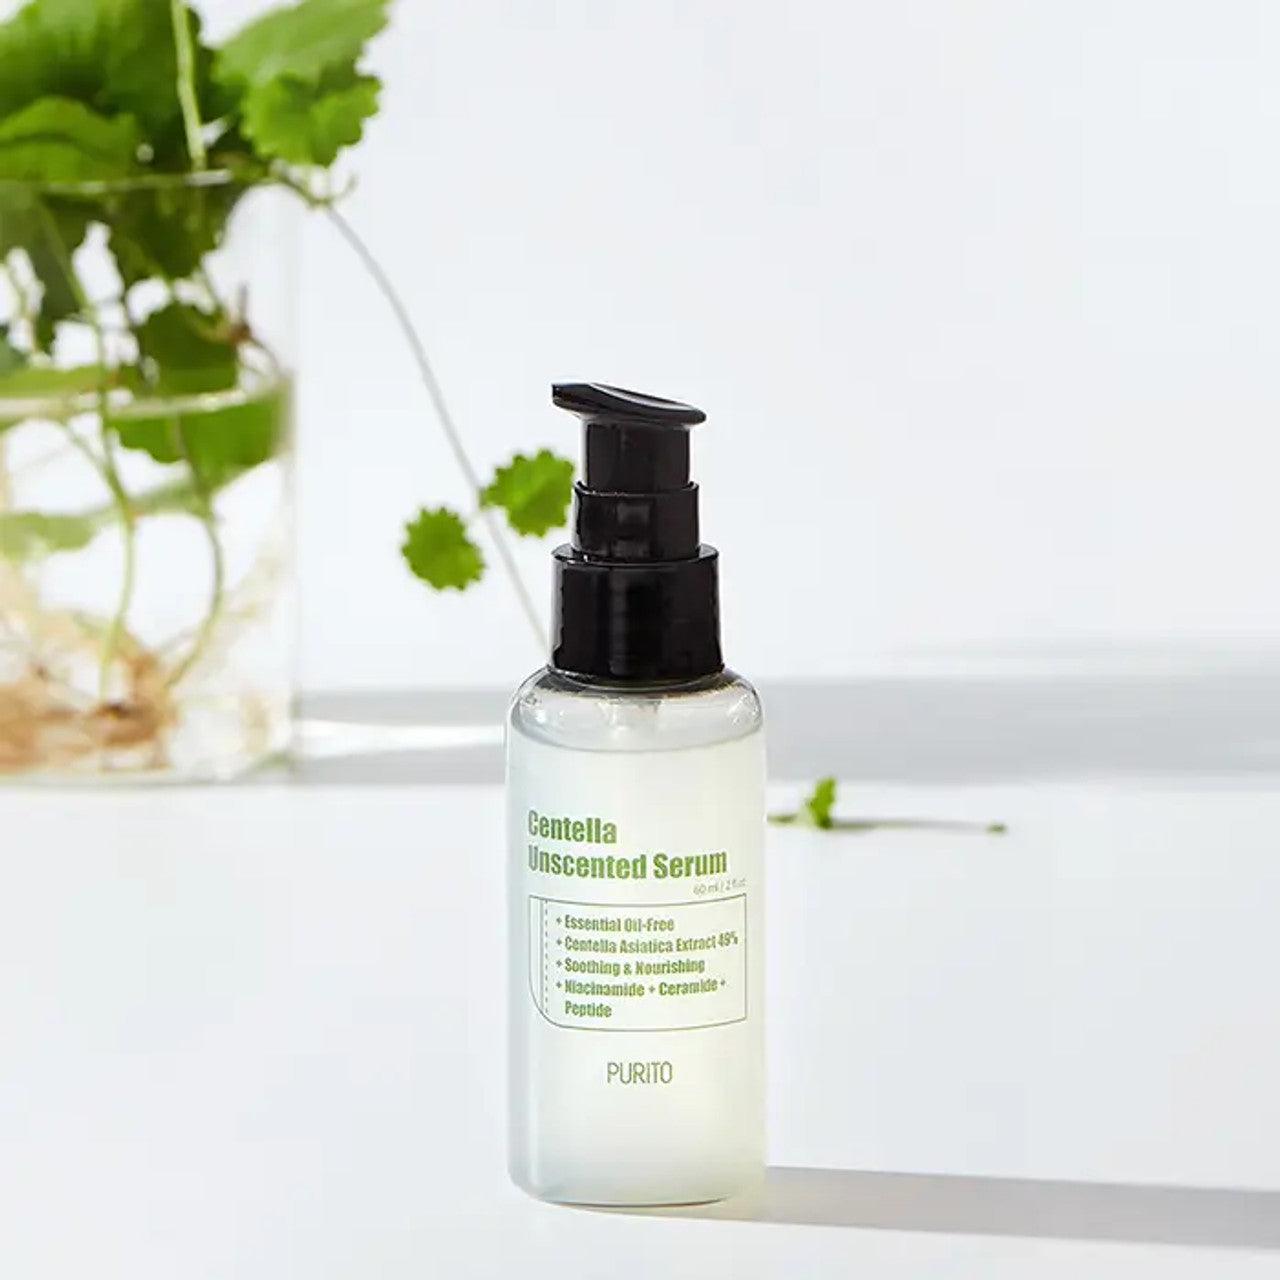 Shop Purito Centella Unscented Serum Mini 15ml for Skin Soothing and Hydration at Atelier de Glow